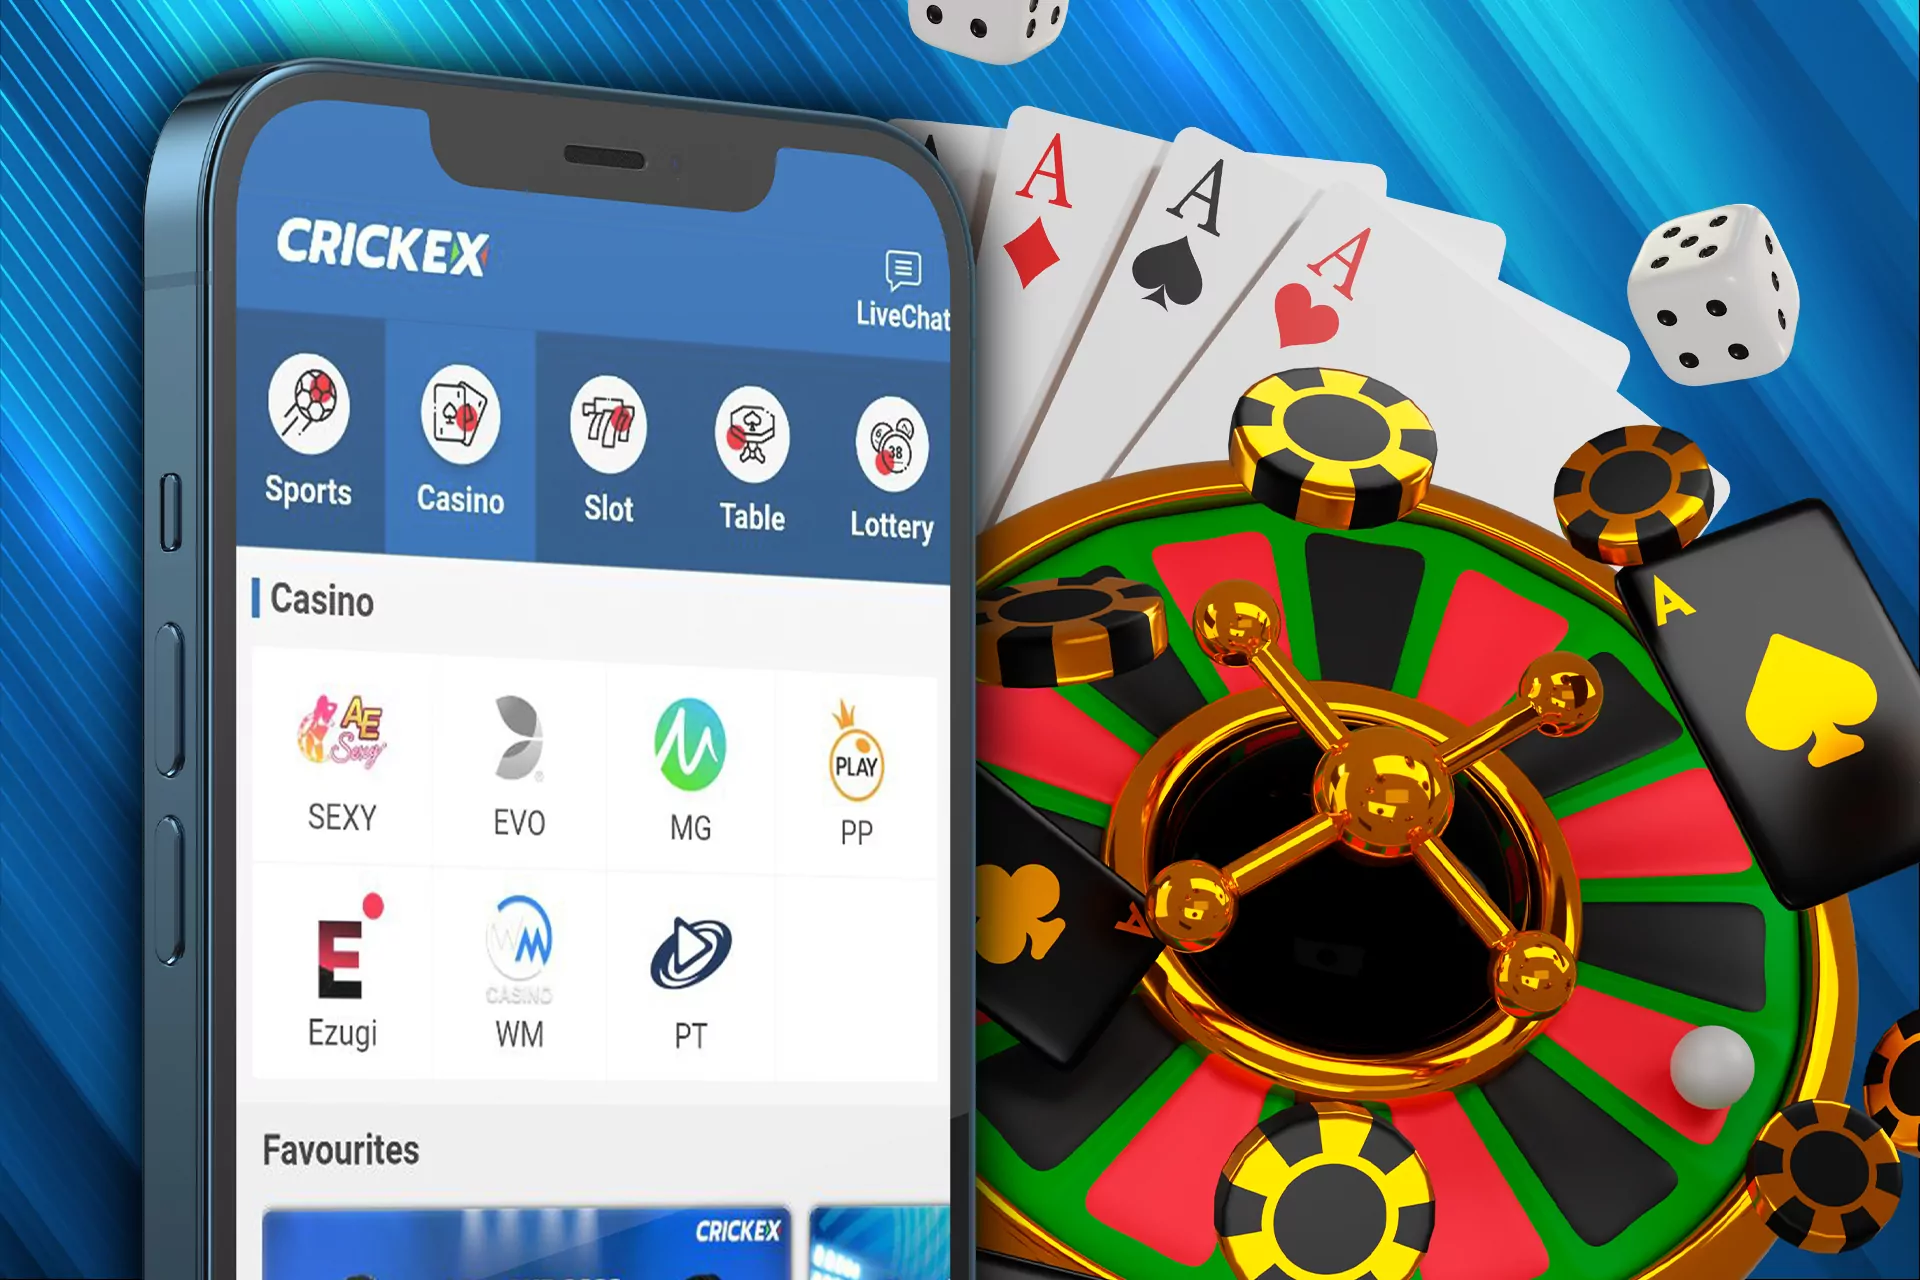 You can also play casino games in the Crickex app.